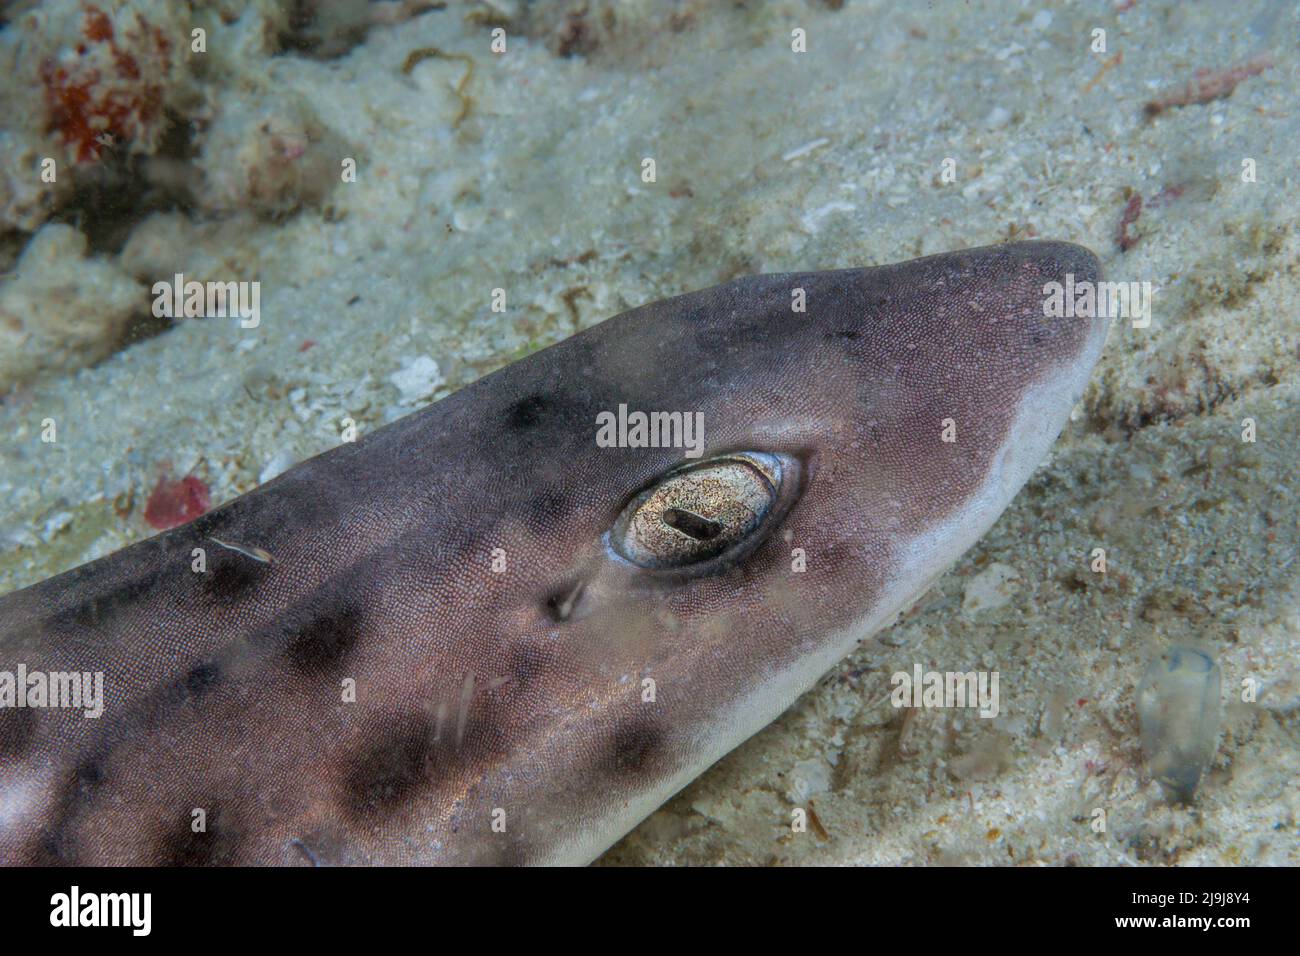 The coral catshark, Atelomycterus marmoratus, is the most widely distributed member of its genus, Indonesia. Bottom-dwelling in nature, the coral cats Stock Photo